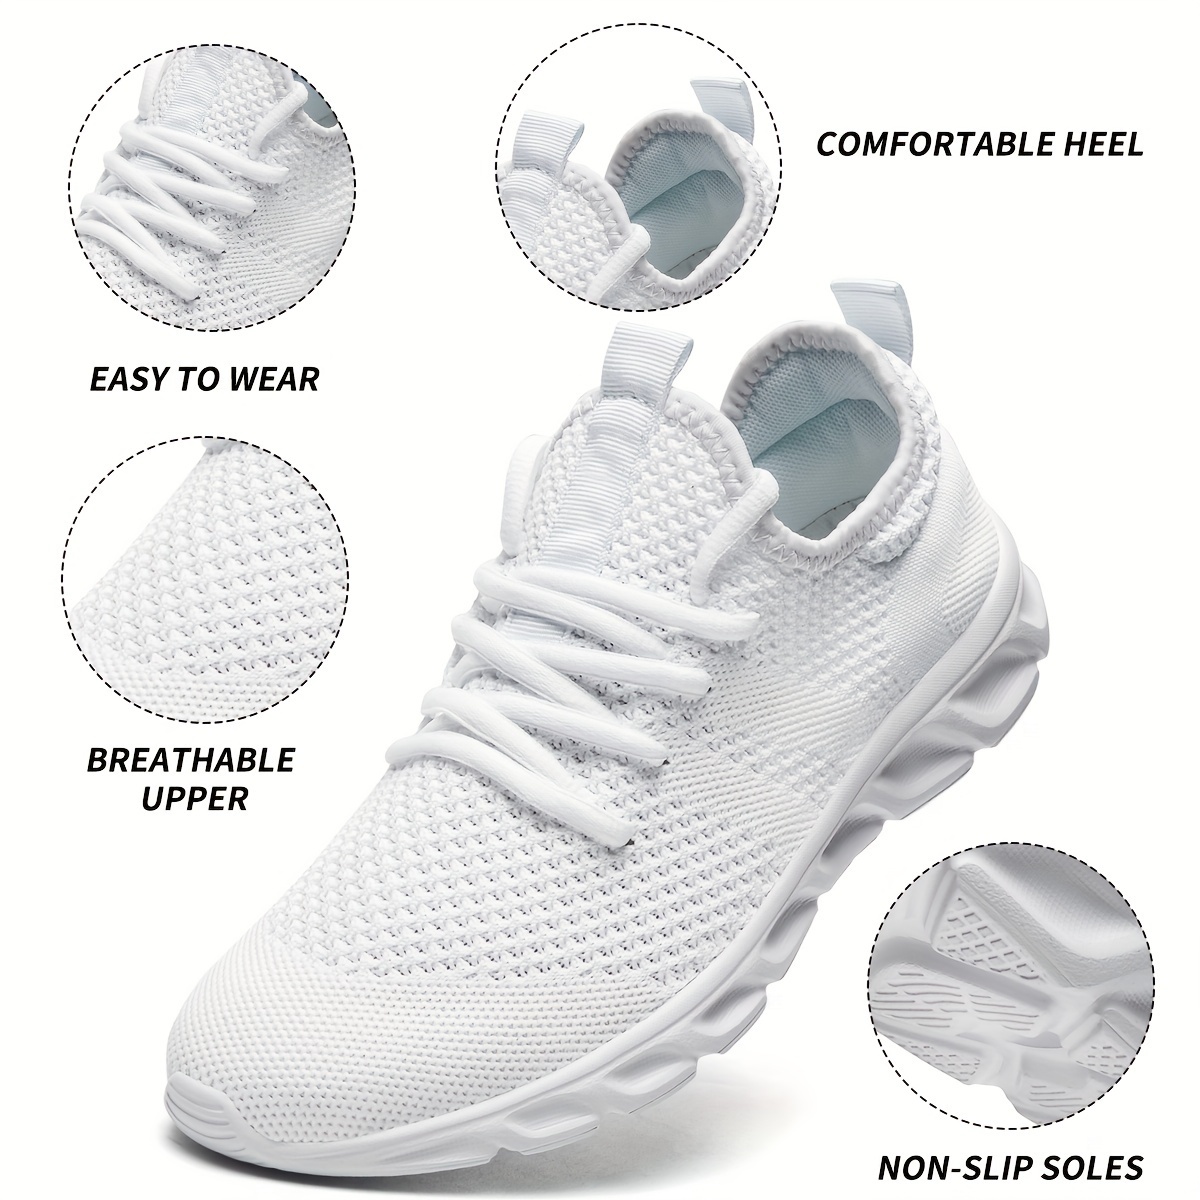 

Men's Casual Sneakers - A01, Breathable Mesh Running Shoes, Lightweight Athletic Walking Footwear, White, Comfortable Daily Trainers